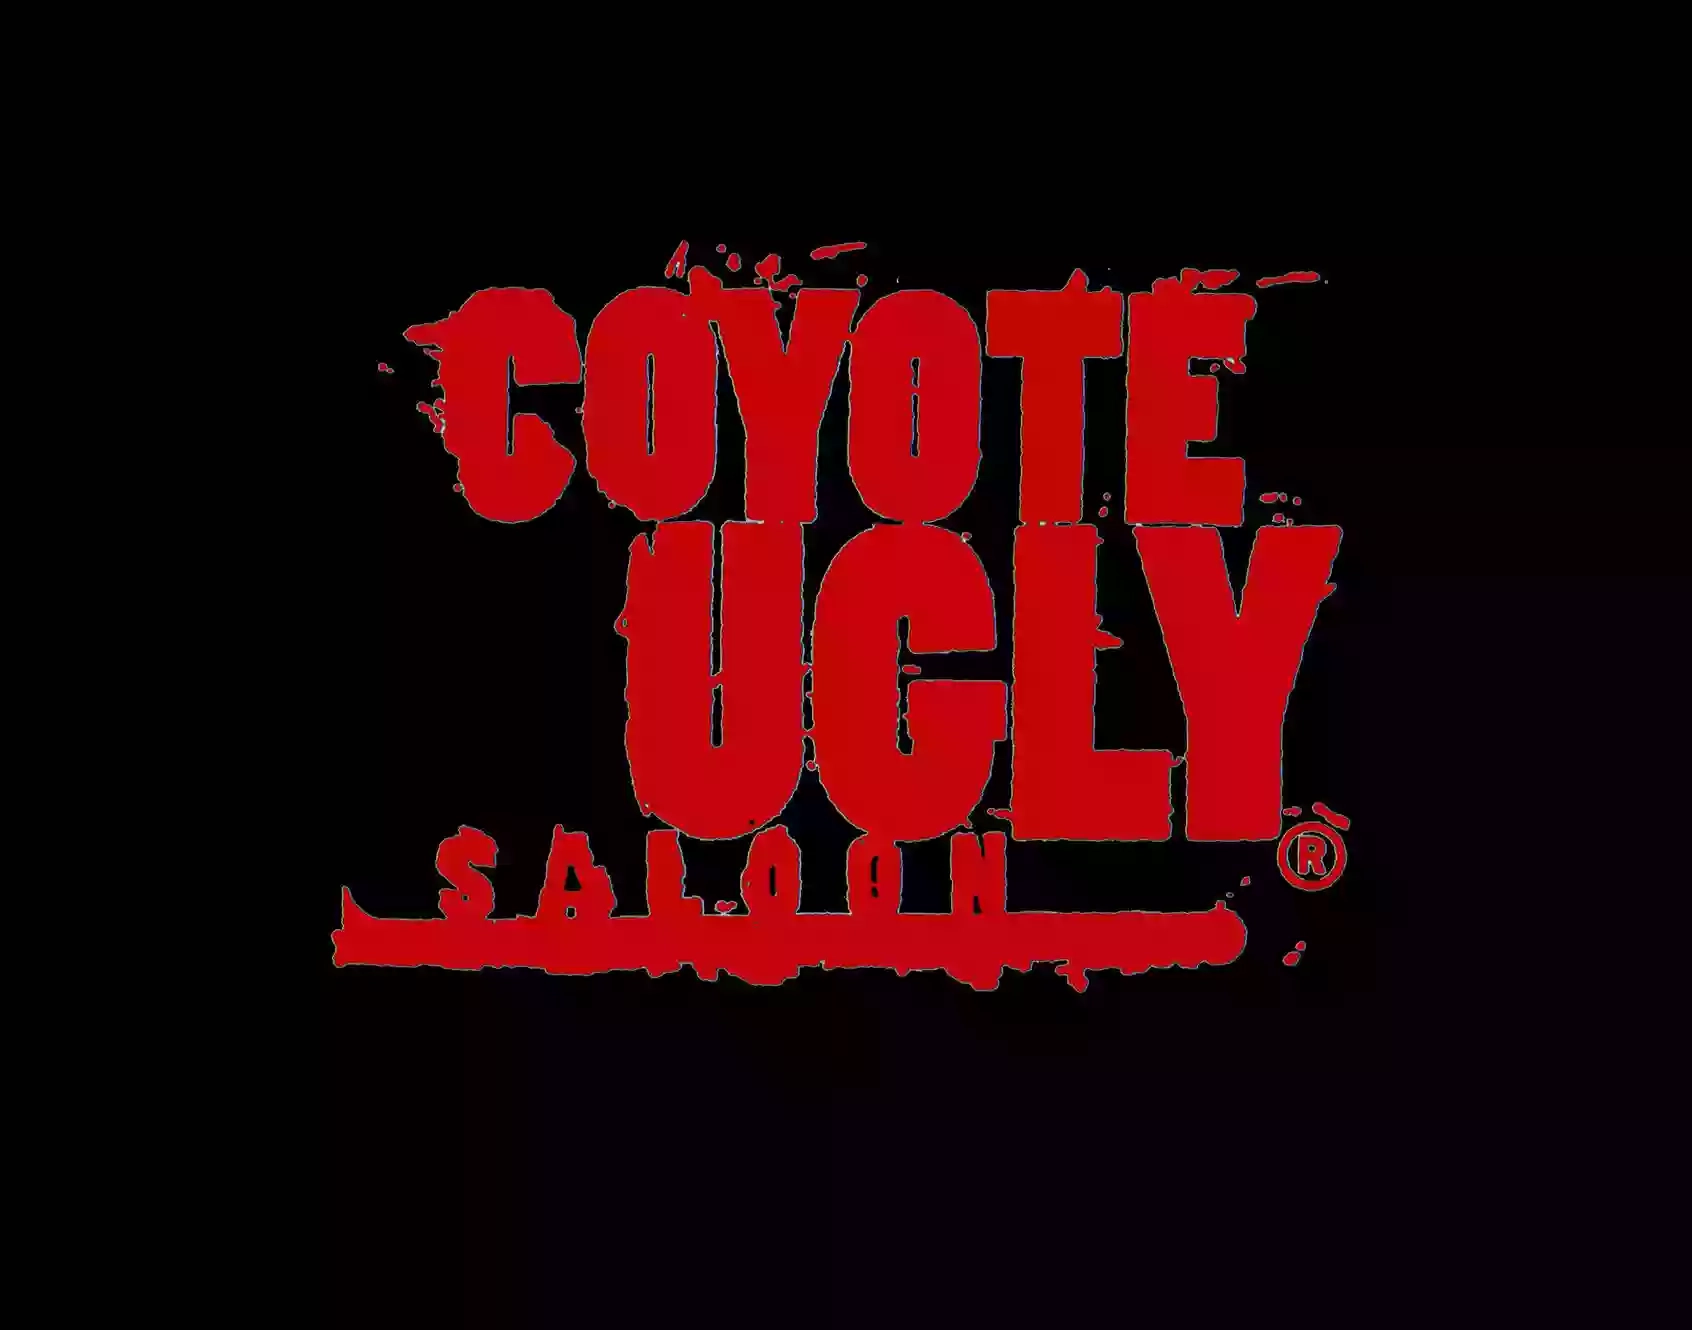 Coyote Ugly Saloon - Liverpool